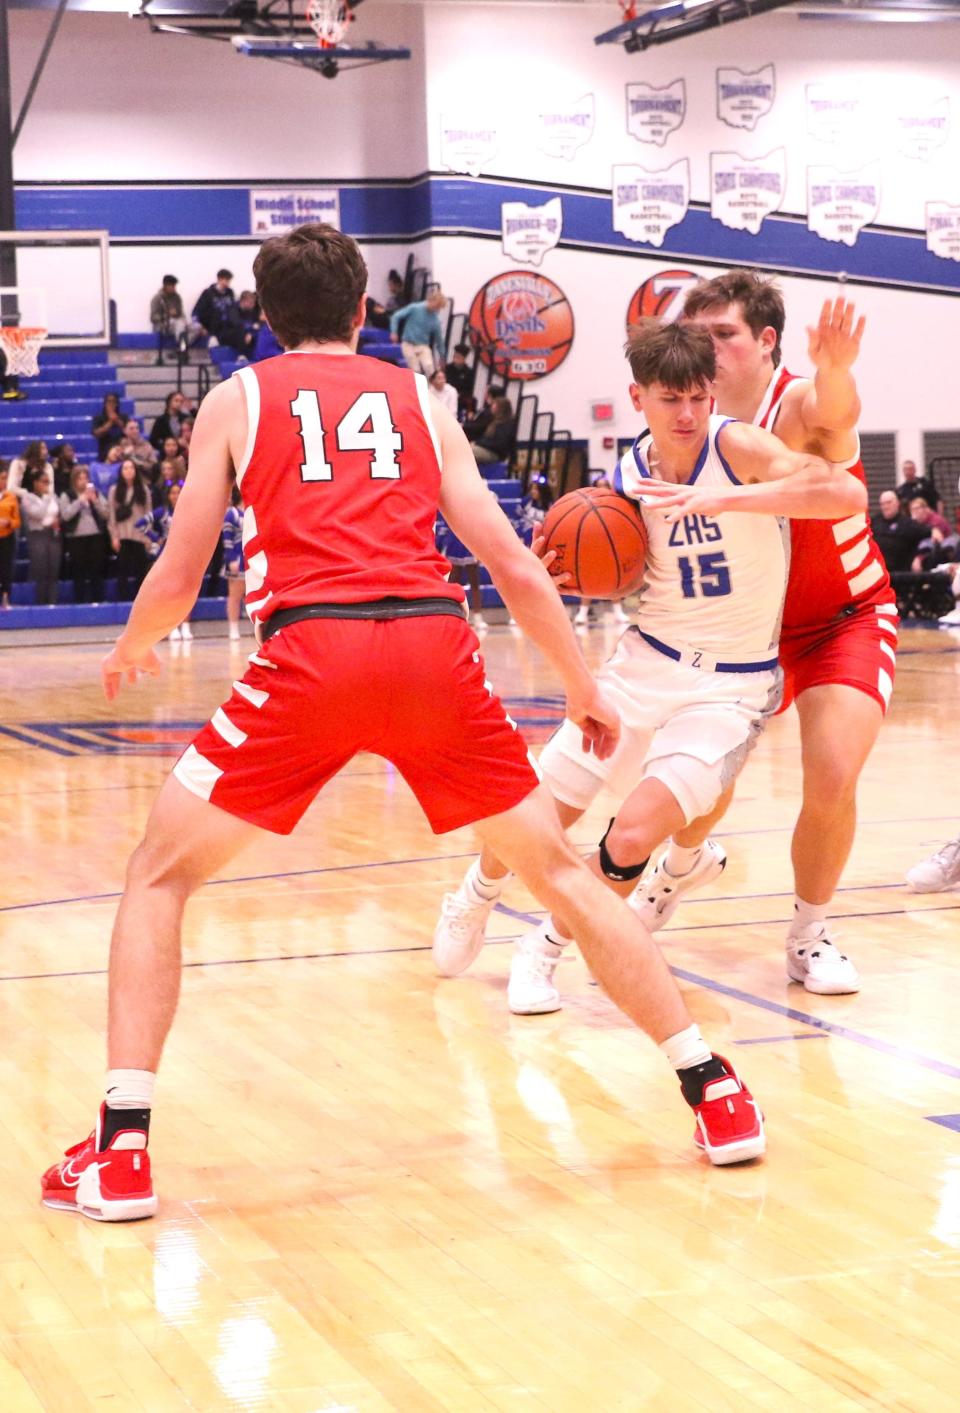 Zanesville's Maddox Hayes tries to get past a Johnstown defender and fellow Johnnie, Kyle Siegfried (14), as the Blue Devils won 53-45 on Wednesday.